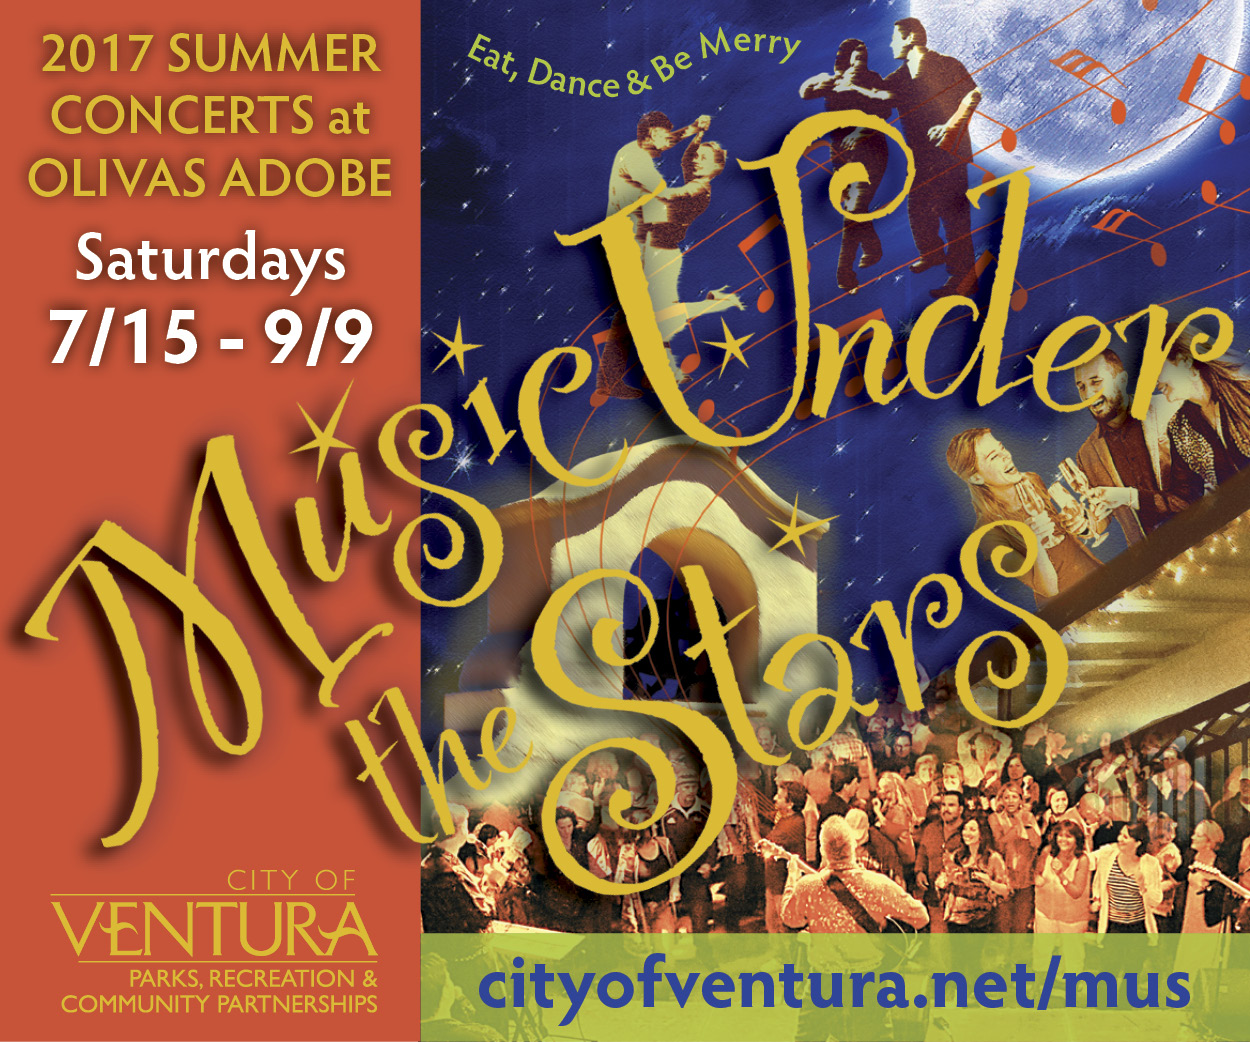 Music Under the Stars Concert Series presented by City of Ventura Parks, Recreation & Community